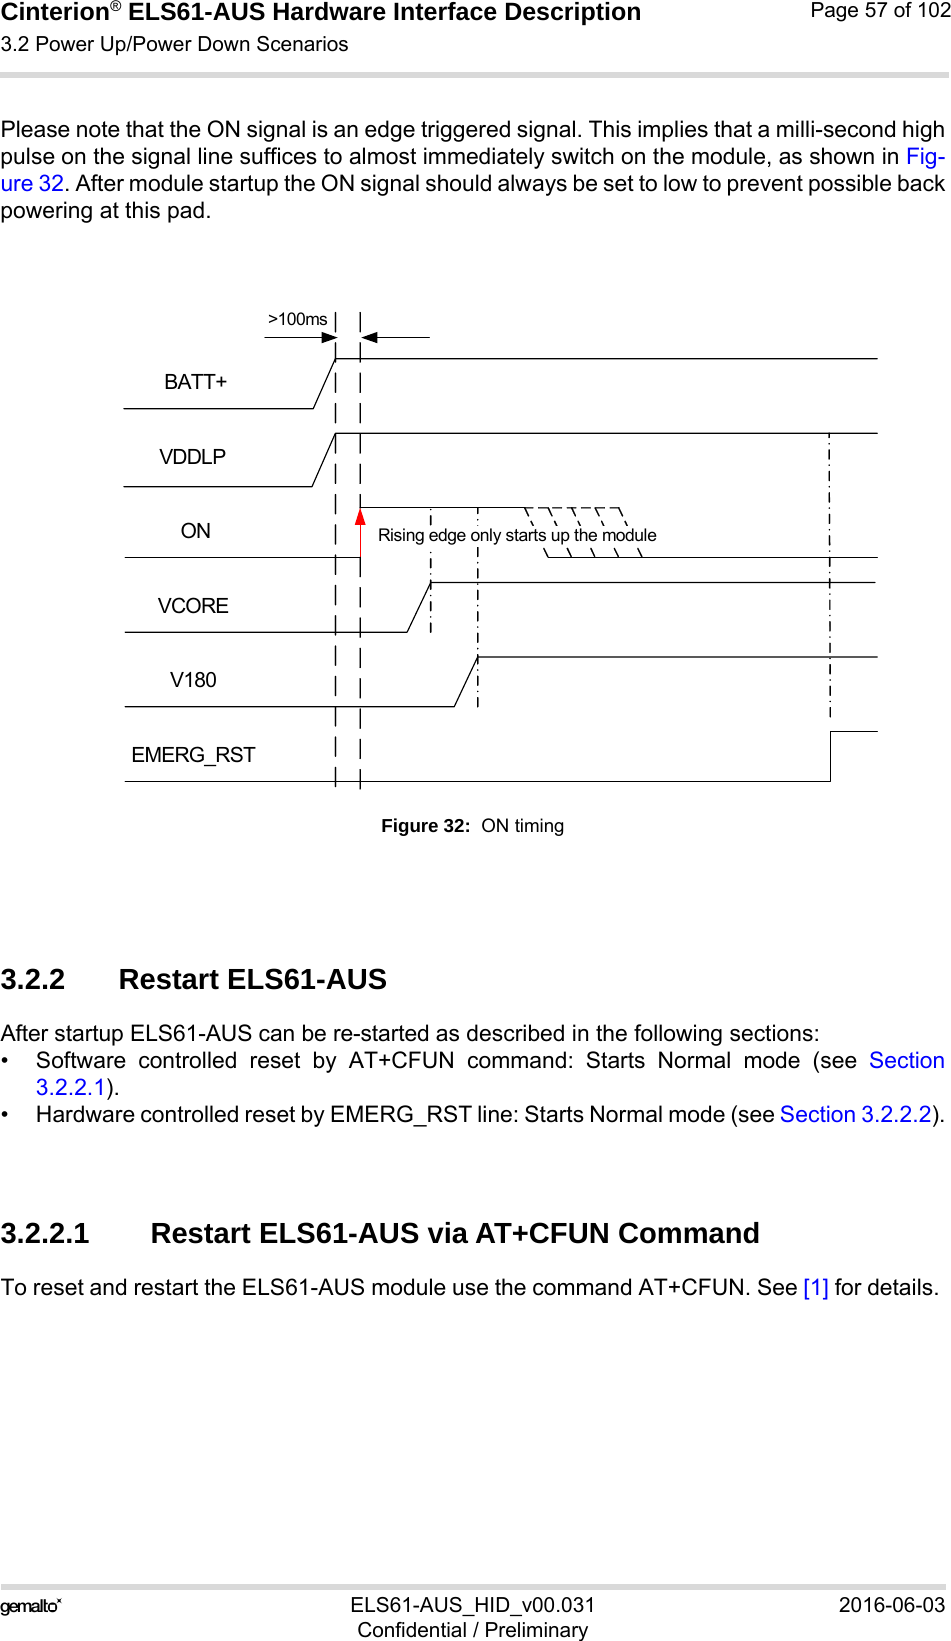 Cinterion® ELS61-AUS Hardware Interface Description3.2 Power Up/Power Down Scenarios73ELS61-AUS_HID_v00.031 2016-06-03Confidential / PreliminaryPage 57 of 102Please note that the ON signal is an edge triggered signal. This implies that a milli-second highpulse on the signal line suffices to almost immediately switch on the module, as shown in Fig-ure 32. After module startup the ON signal should always be set to low to prevent possible backpowering at this pad.Figure 32:  ON timing3.2.2 Restart ELS61-AUS After startup ELS61-AUS can be re-started as described in the following sections:• Software controlled reset by AT+CFUN command: Starts Normal mode (see Section3.2.2.1).• Hardware controlled reset by EMERG_RST line: Starts Normal mode (see Section 3.2.2.2).3.2.2.1 Restart ELS61-AUS via AT+CFUN CommandTo reset and restart the ELS61-AUS module use the command AT+CFUN. See [1] for details. BATT+ONEMERG_RSTV180VCOREVDDLPRising edge only starts up the module&gt;100ms